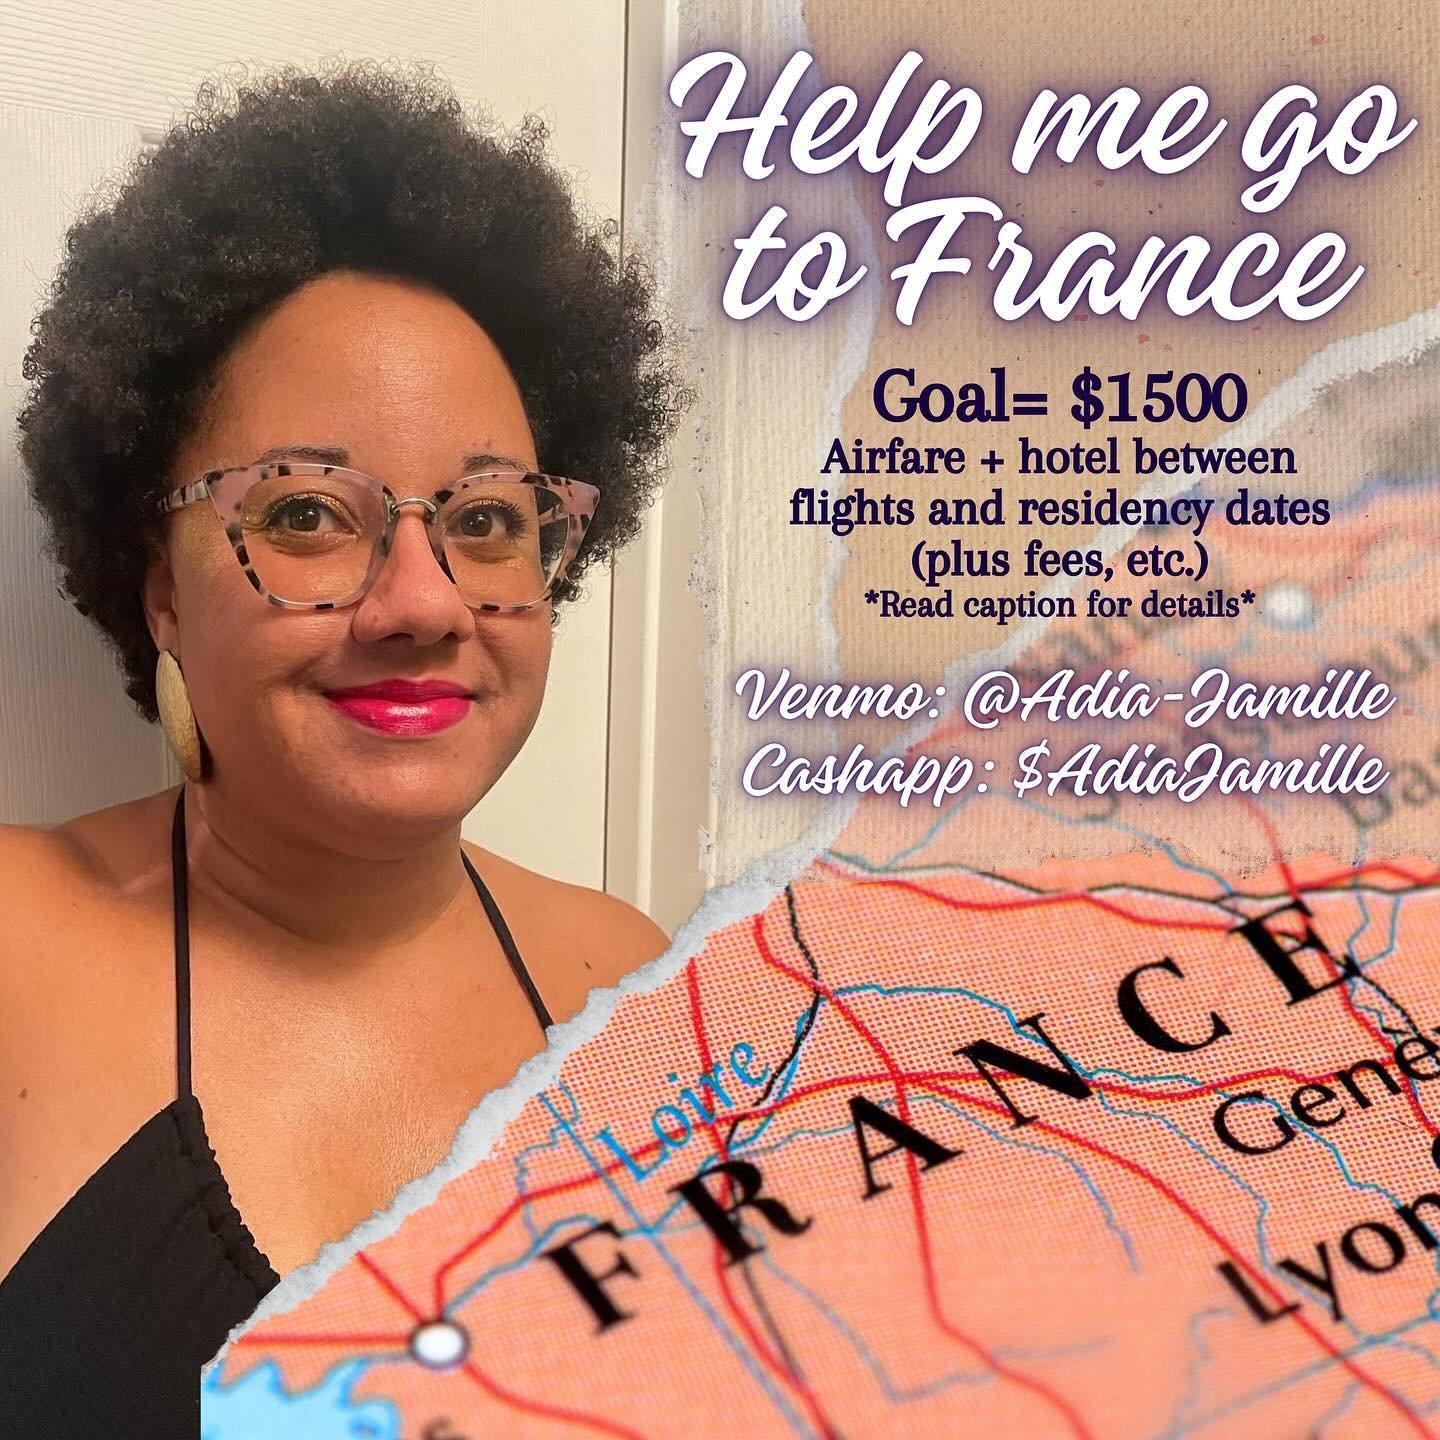 Hey y&rsquo;all! Another opportunity has arrived. I will be attending another residency, later this year, in France this time. Right now airfare is really low and I&rsquo;d love to take advantage of the low prices. BUT as you know I just got back fro